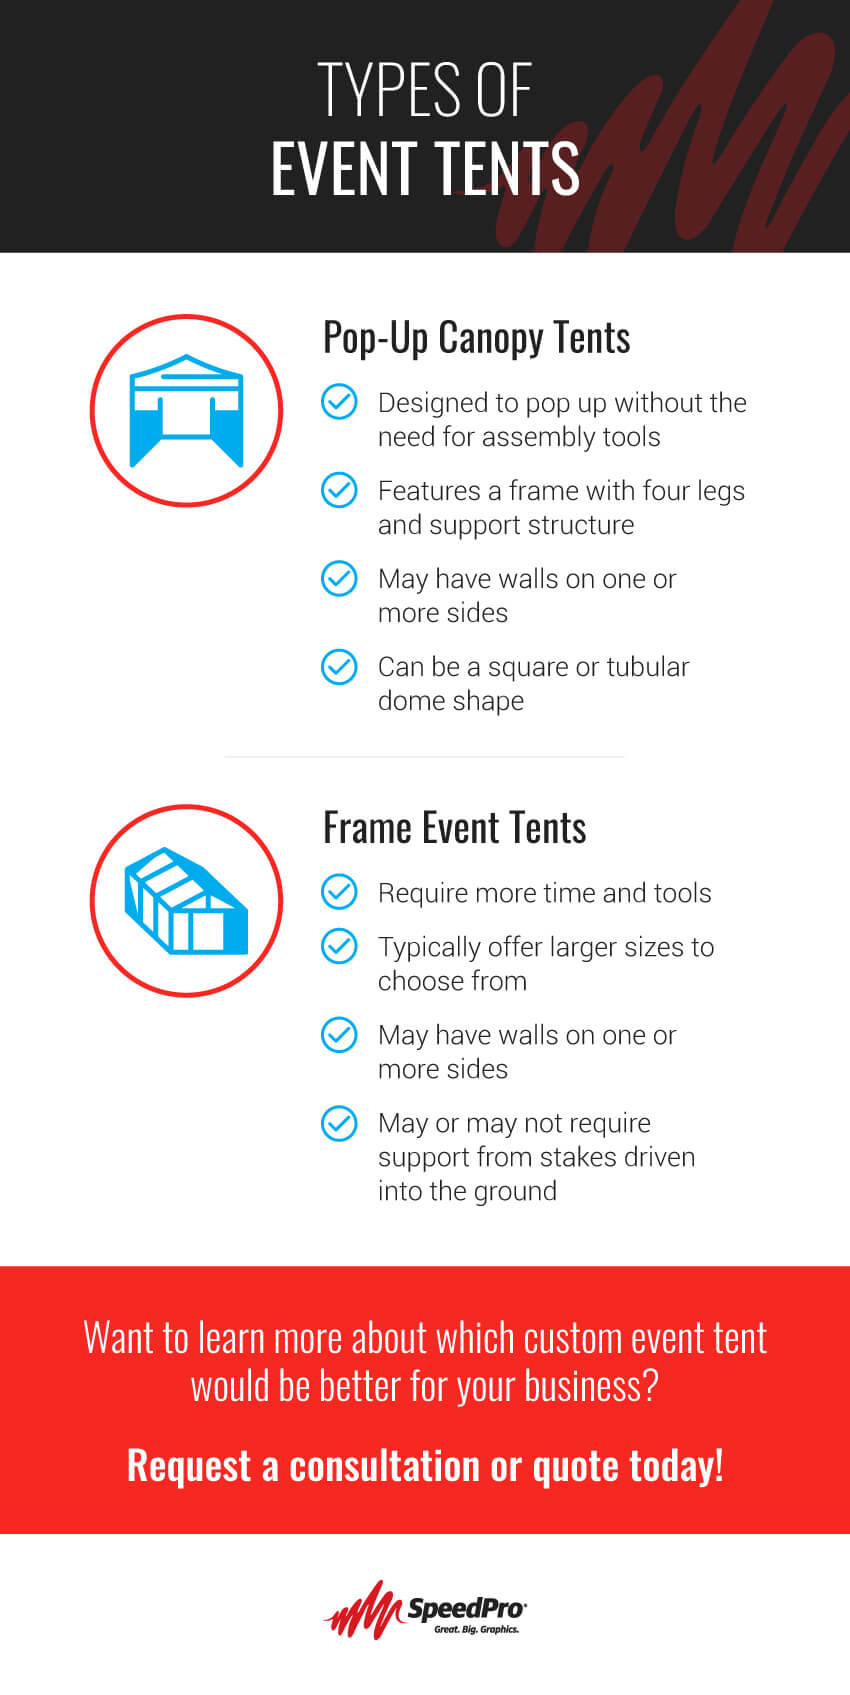 Types of Event Tents [Infographic]